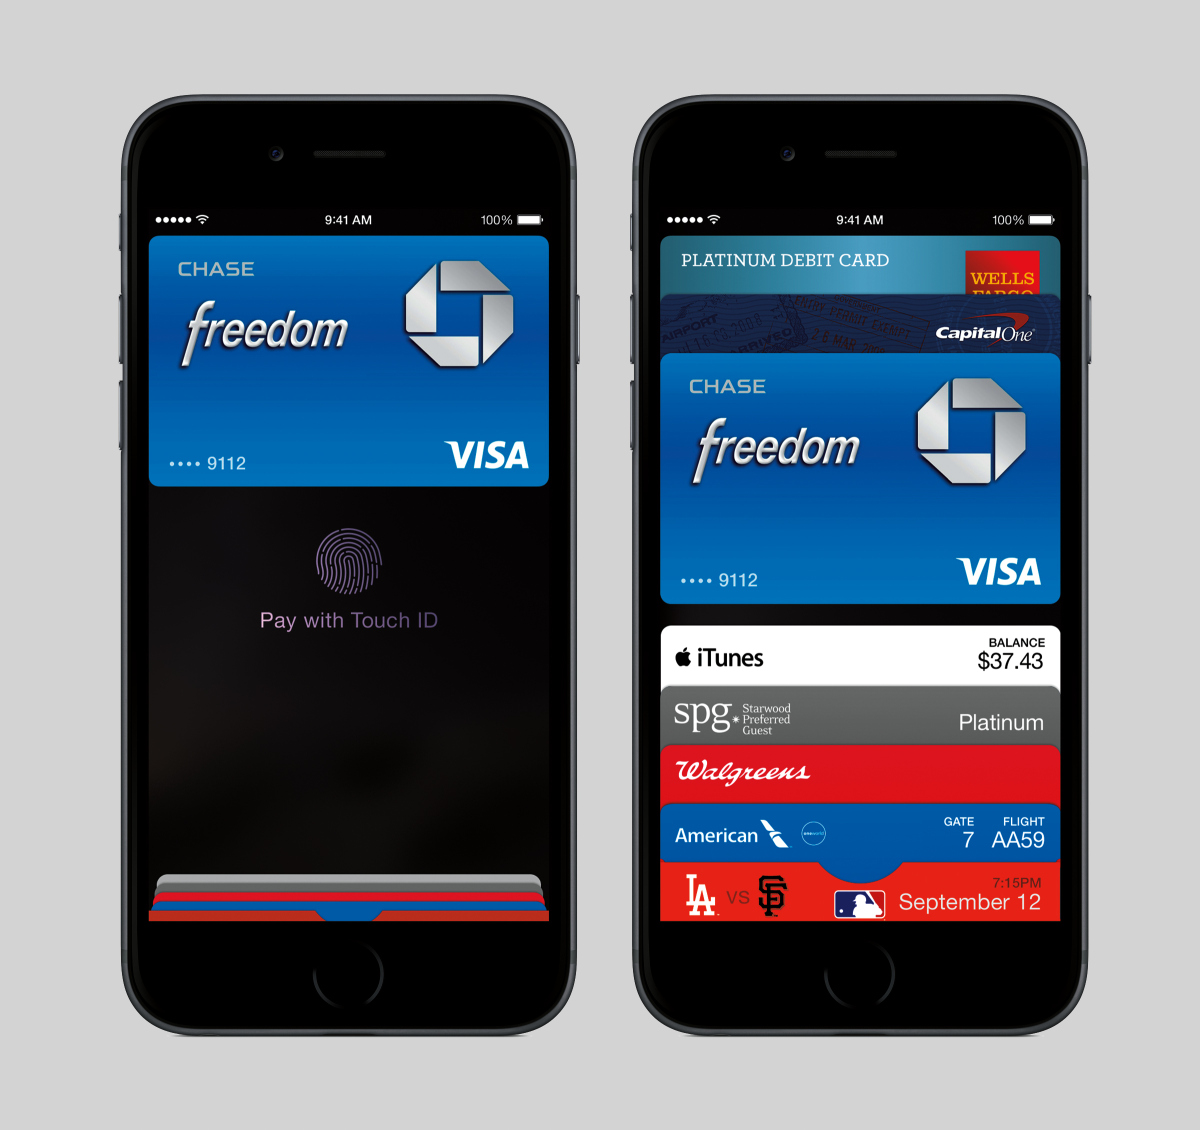 Apple’s Big Announcements: The iPhone 6 and 6 Plus, Apple Pay, and Apple Watch